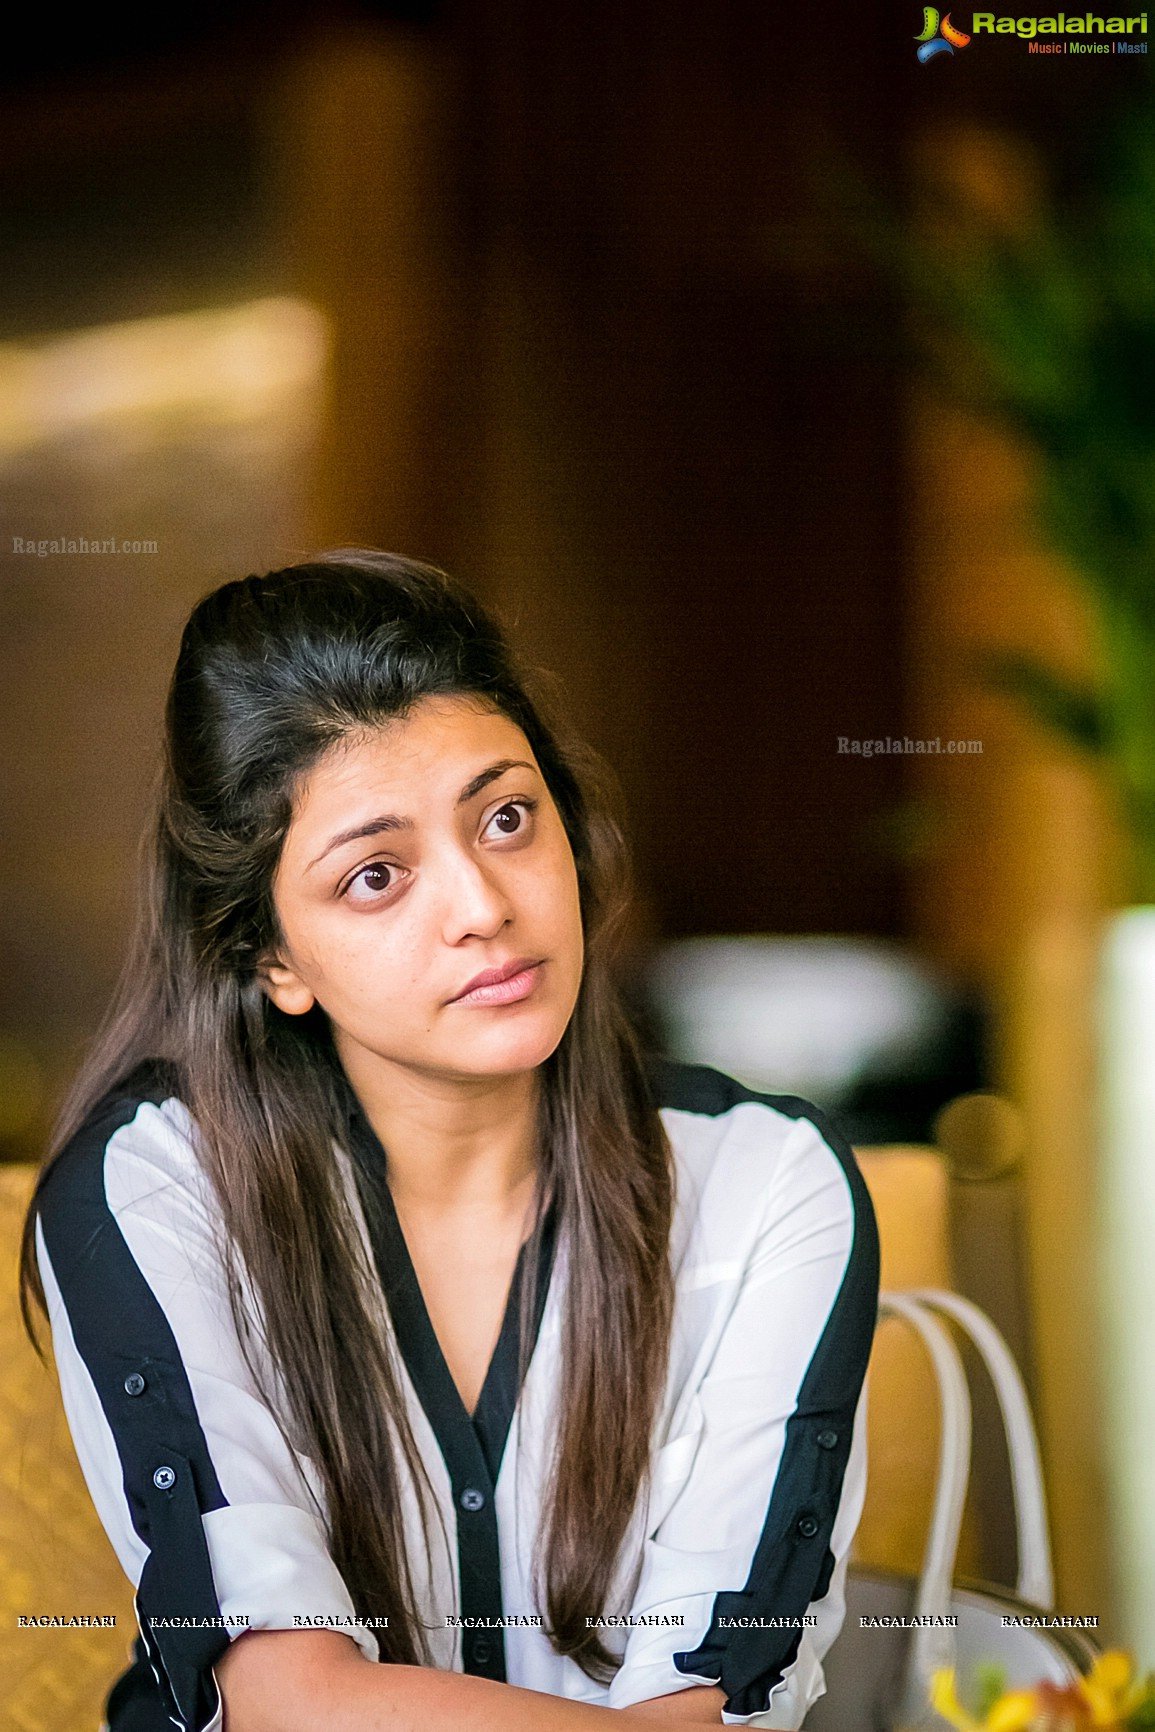 Kajal Aggarwal at SIIMA 2013 - Exclusive Photo Gallery, Images